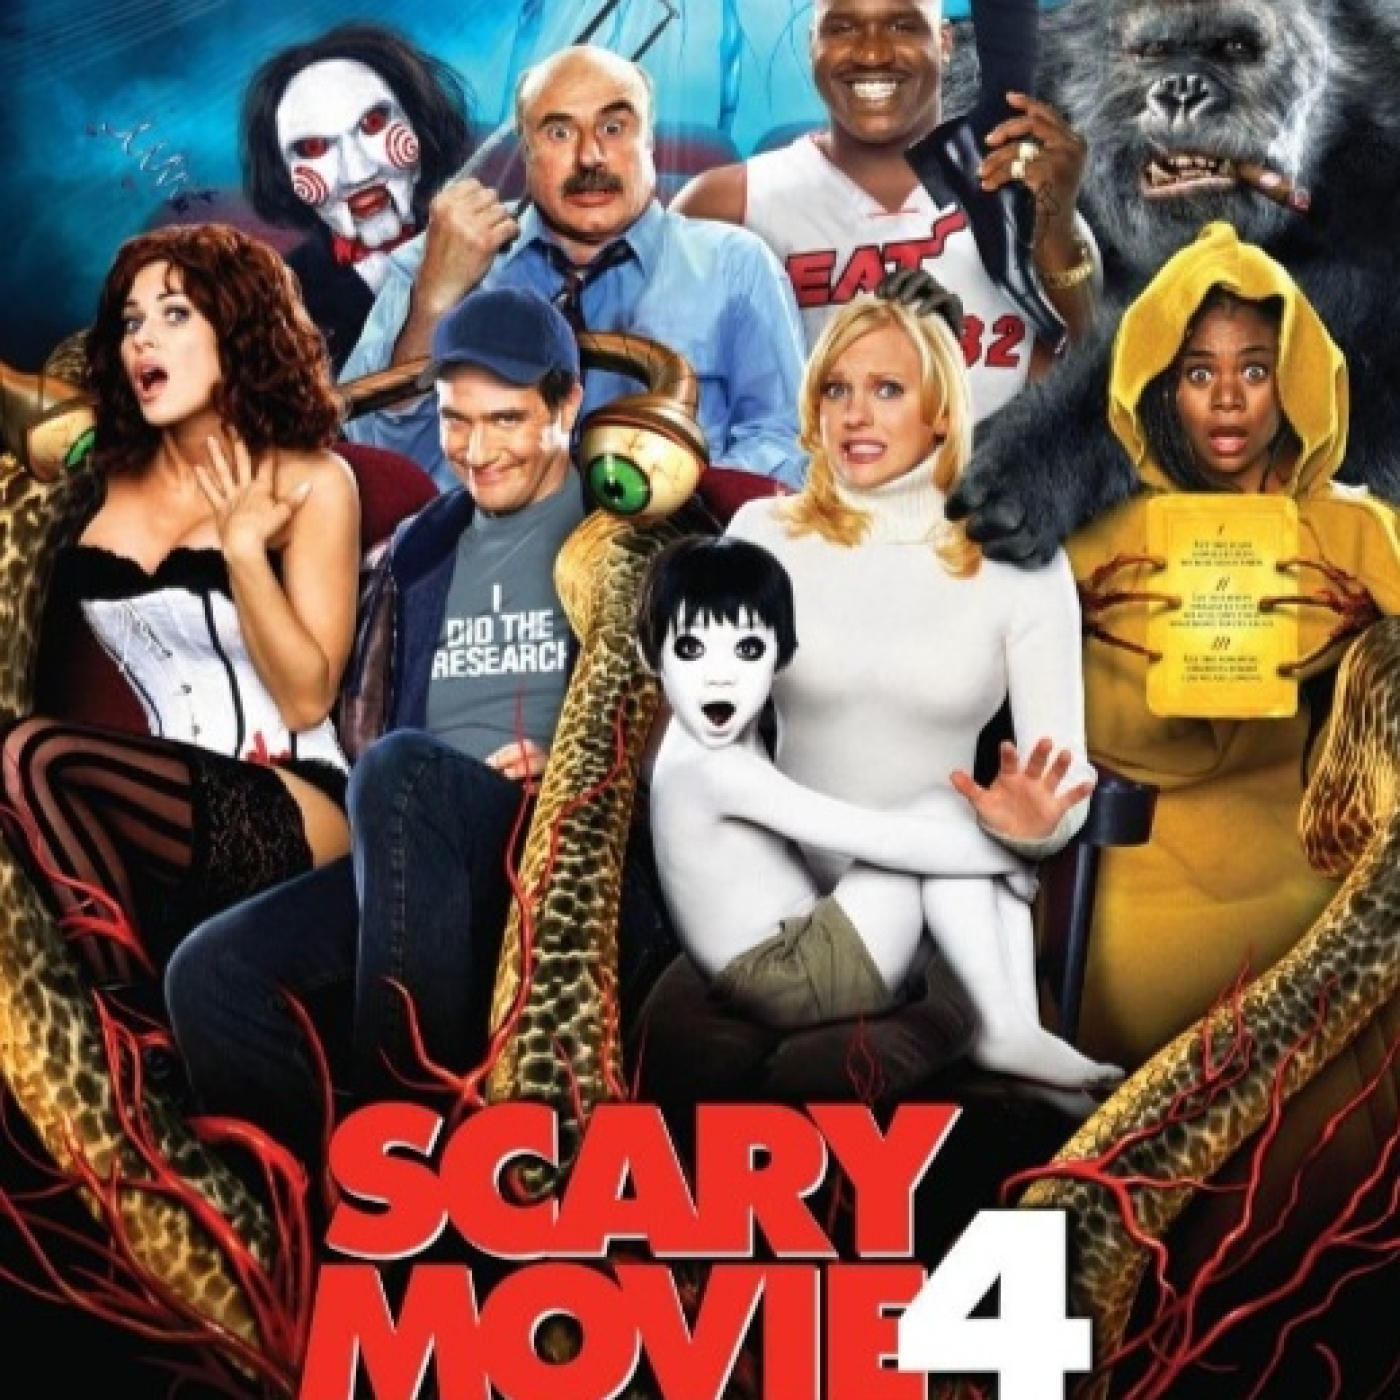 Movies Requests - Scary Movie 4 - 2006